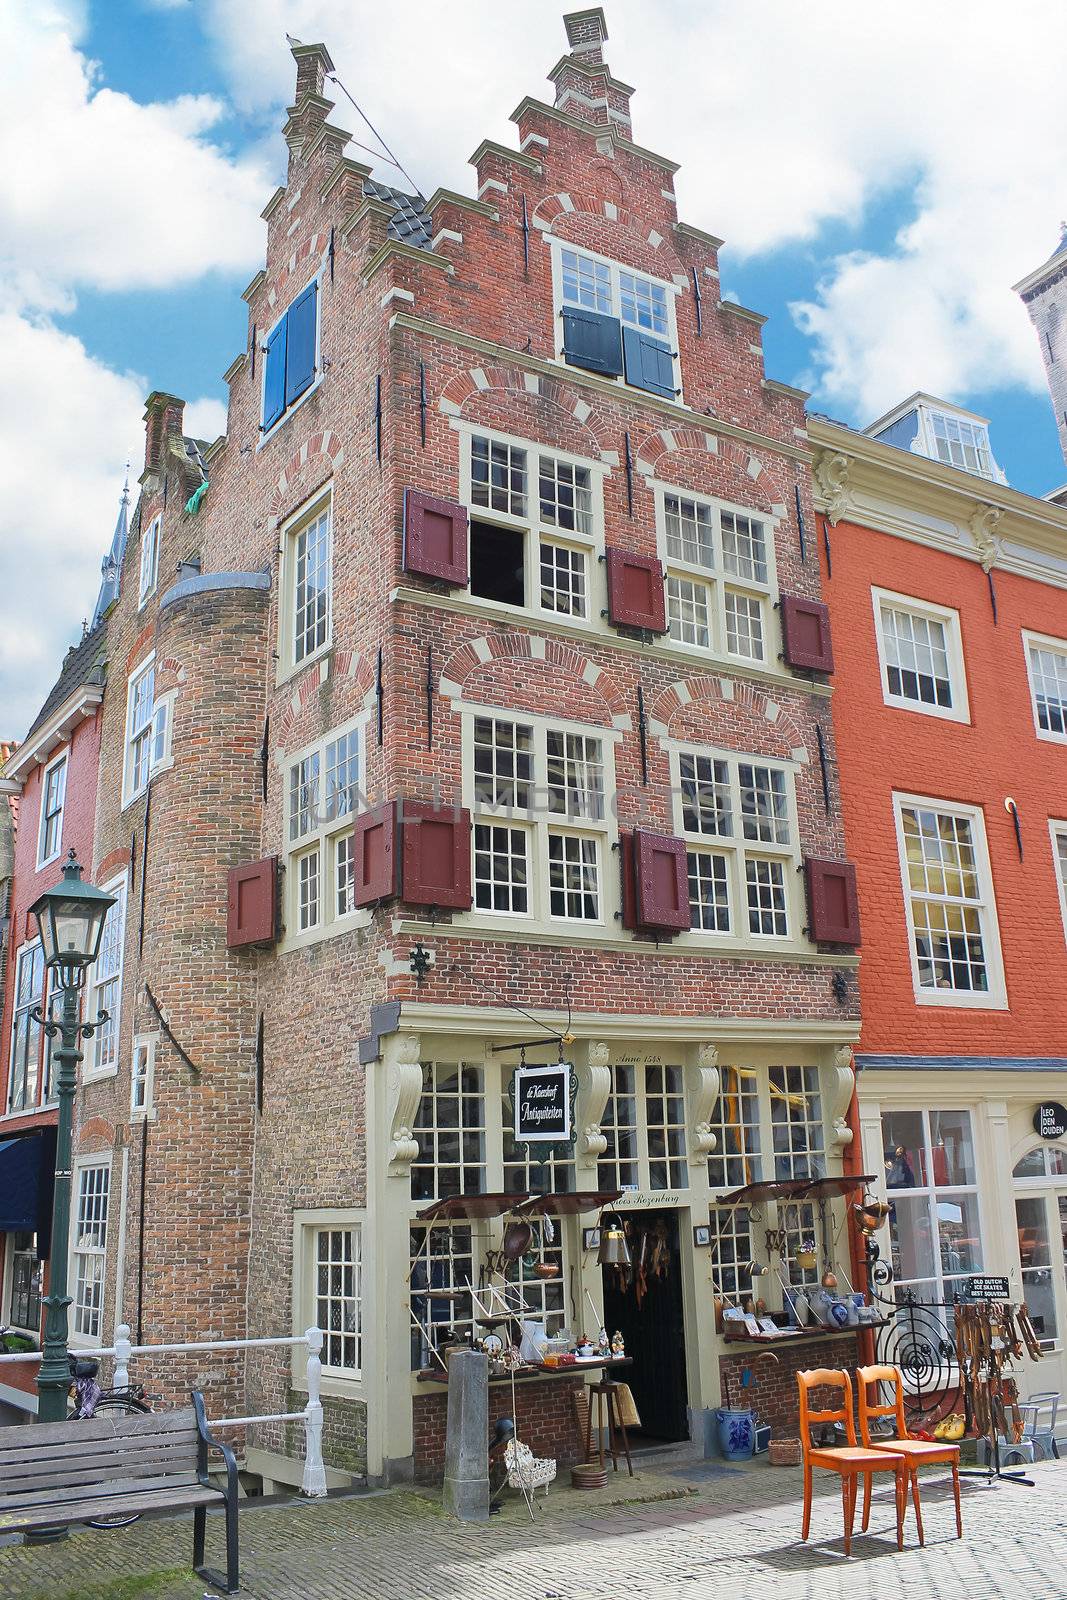 An old building with an antique shop. Netherlands, Delft by NickNick